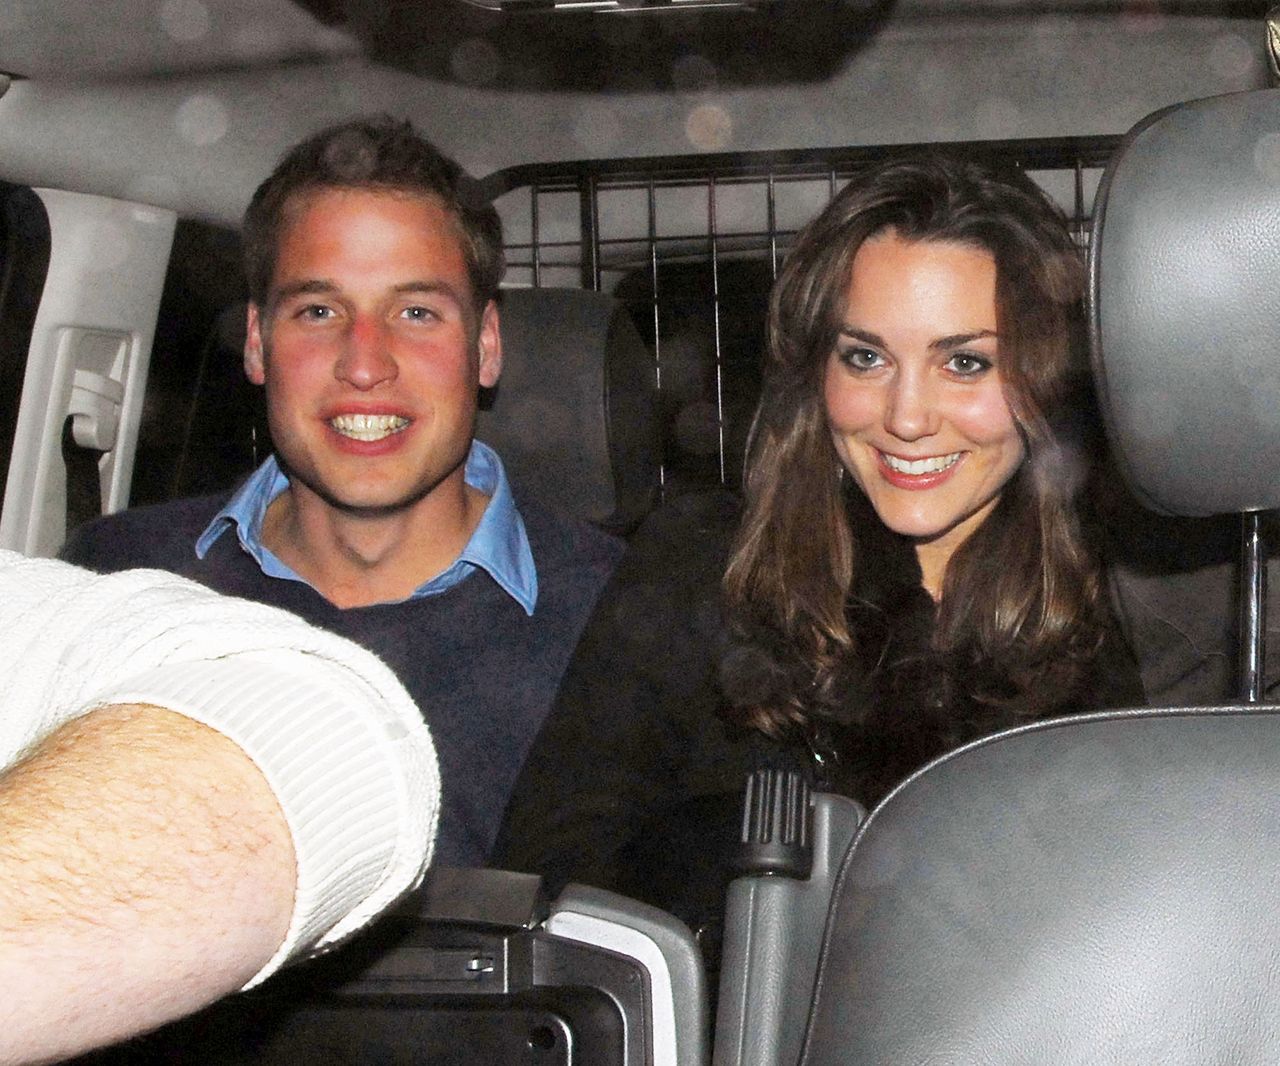 11/12/2006 MAYFAIR, LONDON

PRINCE WILLIAM AND GIRLFRIEND KATE MIDDLETON ENJOY AN EVENING OUT PARTYING AT MAHIKI NIGHTCLUB IN LONDON'S MAYFAIR WITH PALS TOM PARKER BOWLES AND HIS WIFE SARA BUYS. THEY LEFT THE CLUB IN THE VERY EARLY HOURS AND HEADED BACK TO THE PALACE AFTER DANCING THE NIGHT AWAY.

BYLINE MUST READ: XPOSURE